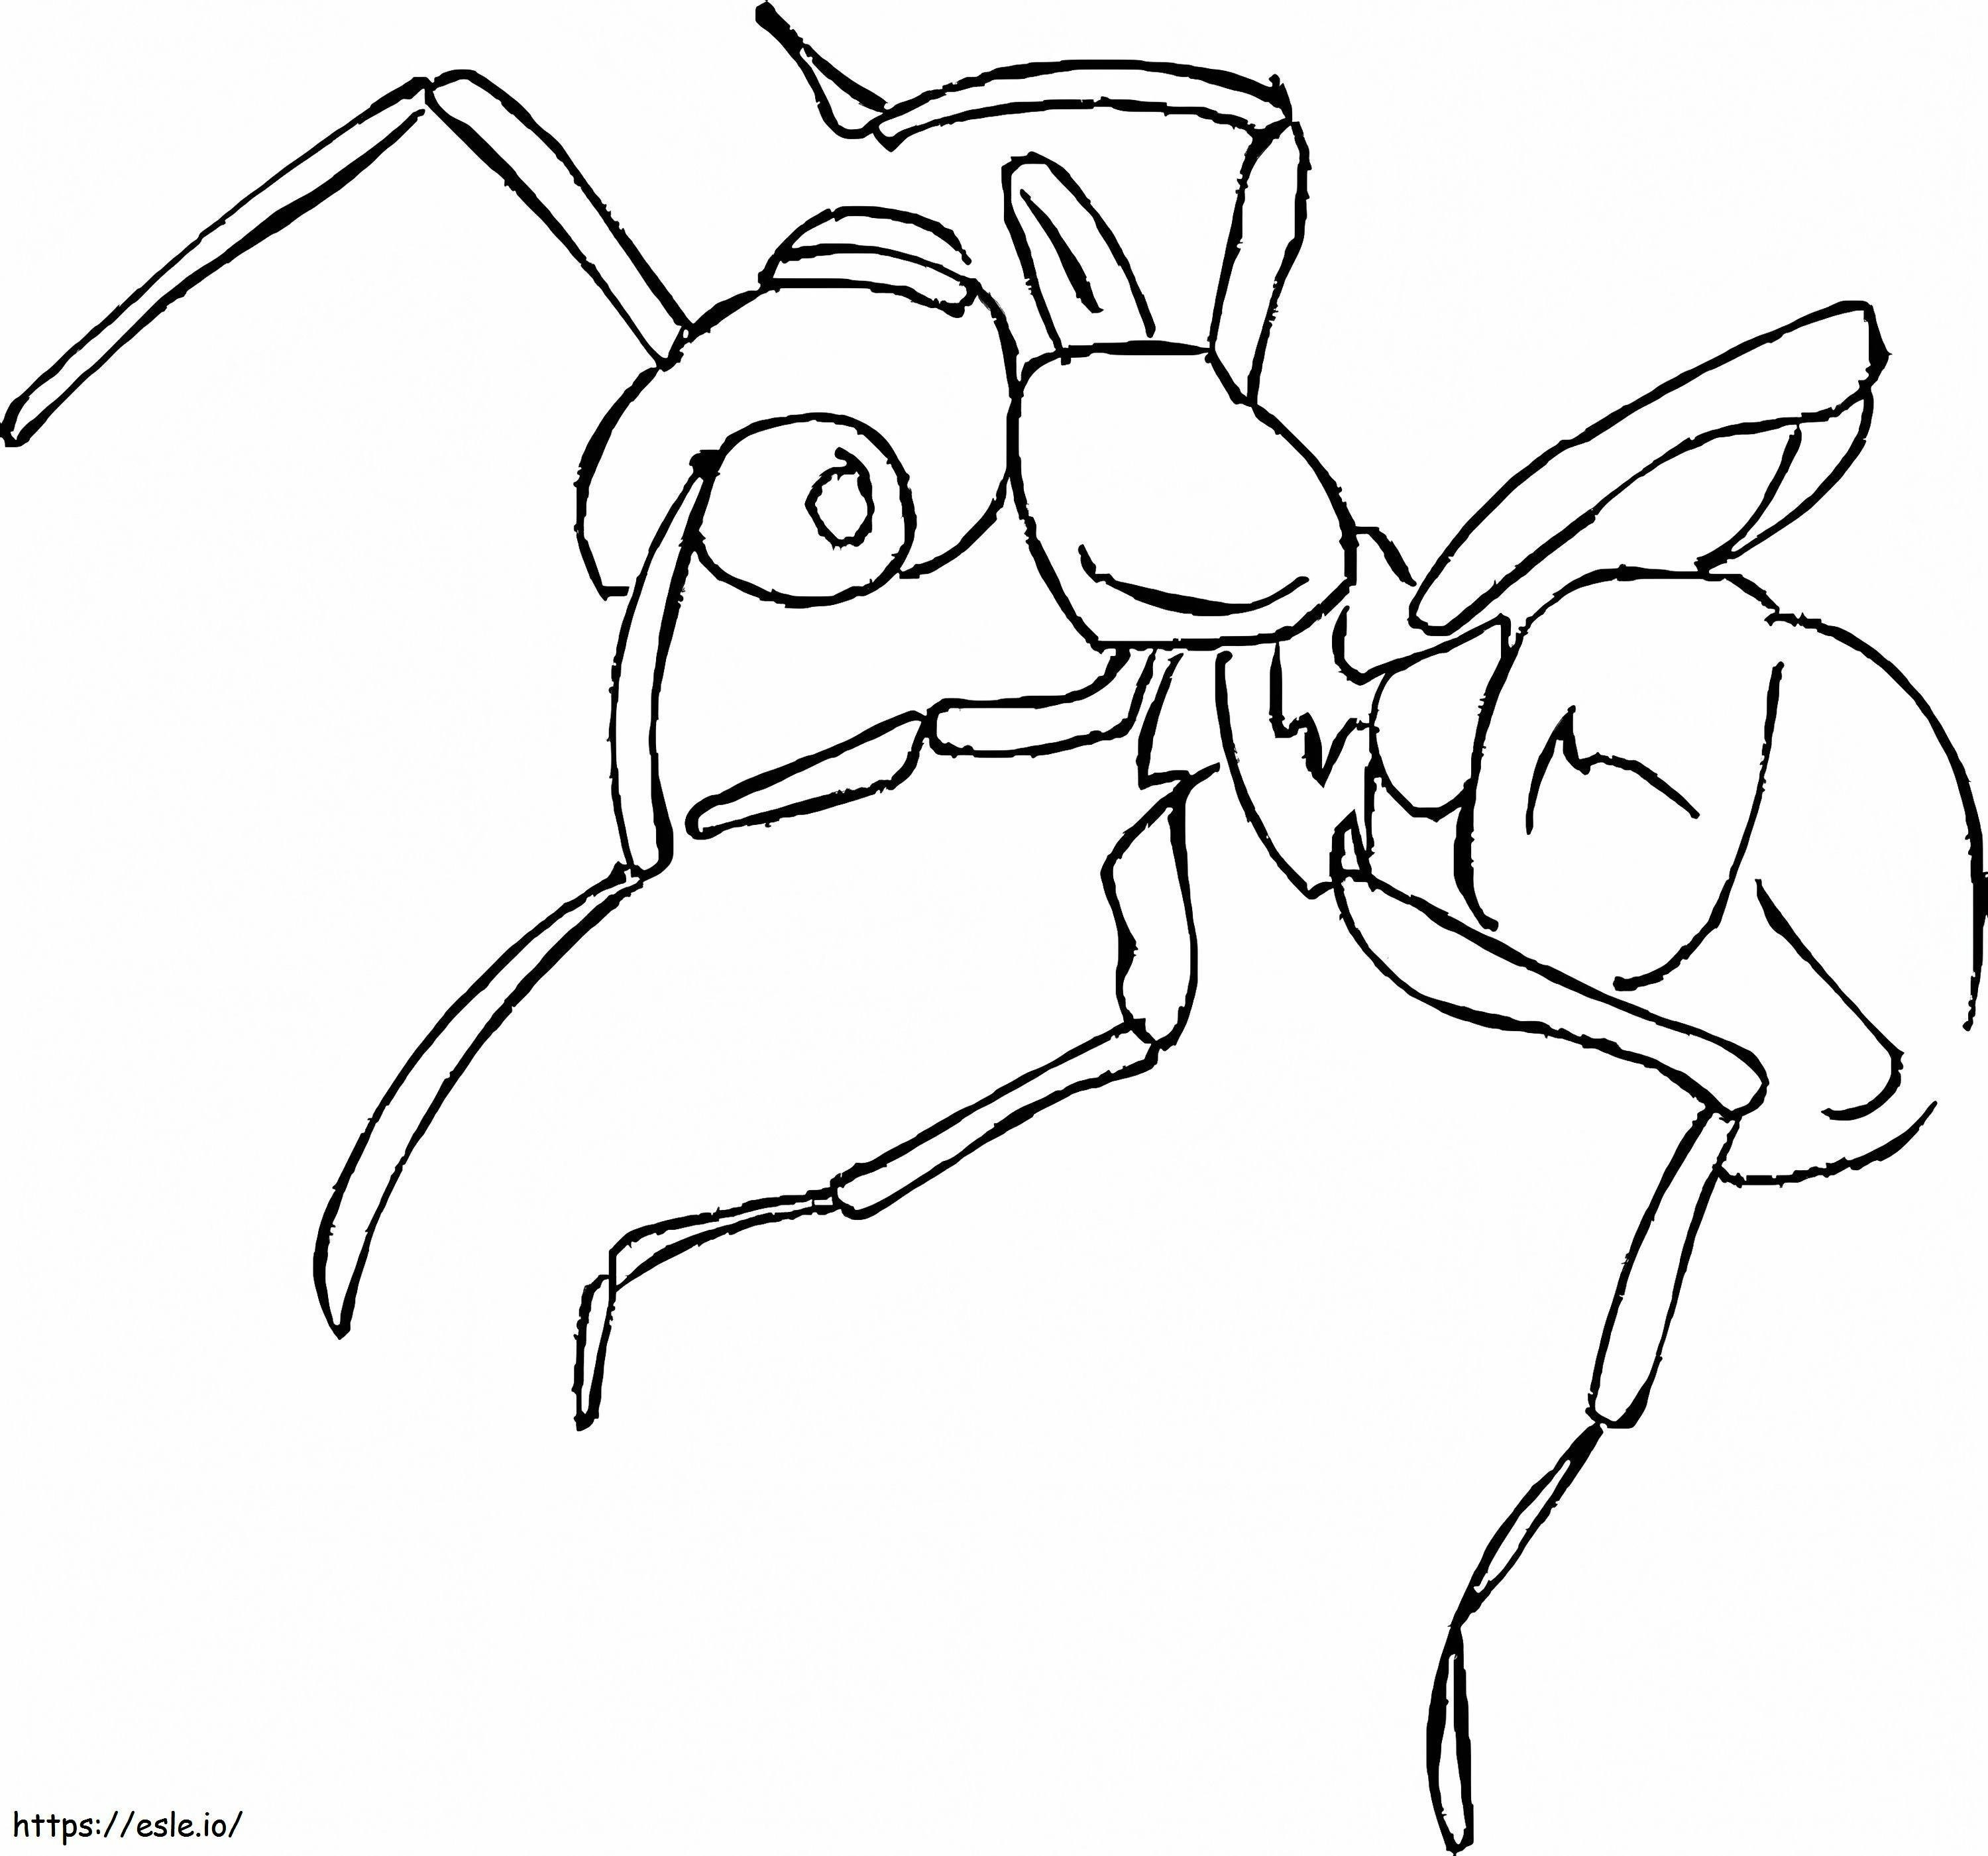 Nice Ant coloring page